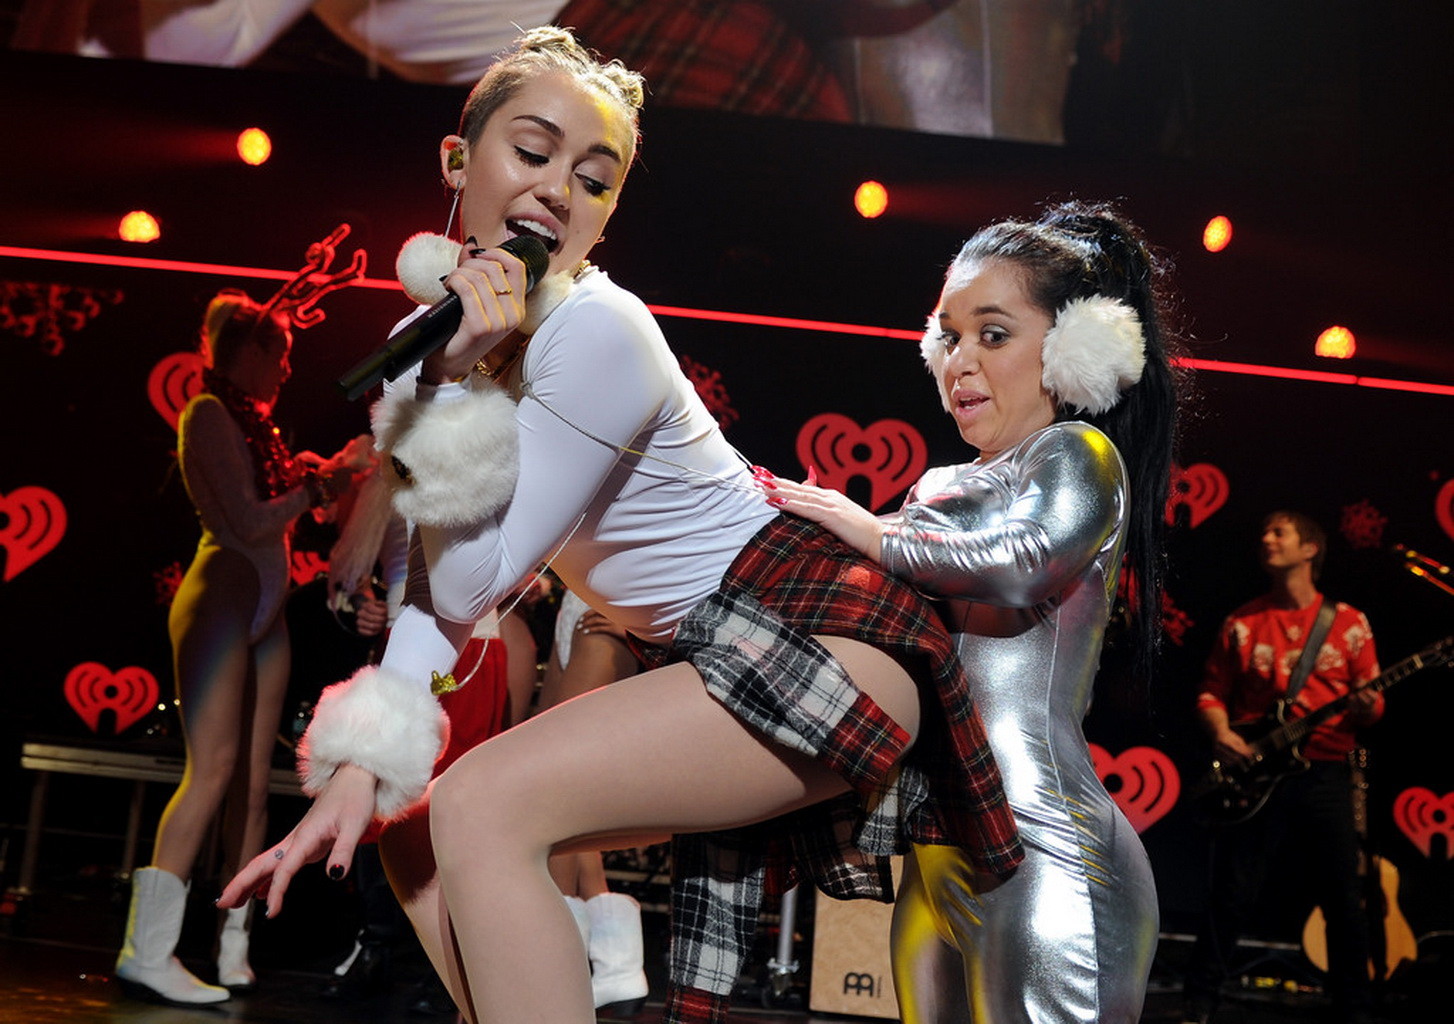 Miley Cyrus wearing white transparent bodysuit at Y100 Jingle Ball 2013 in Miami #75209697